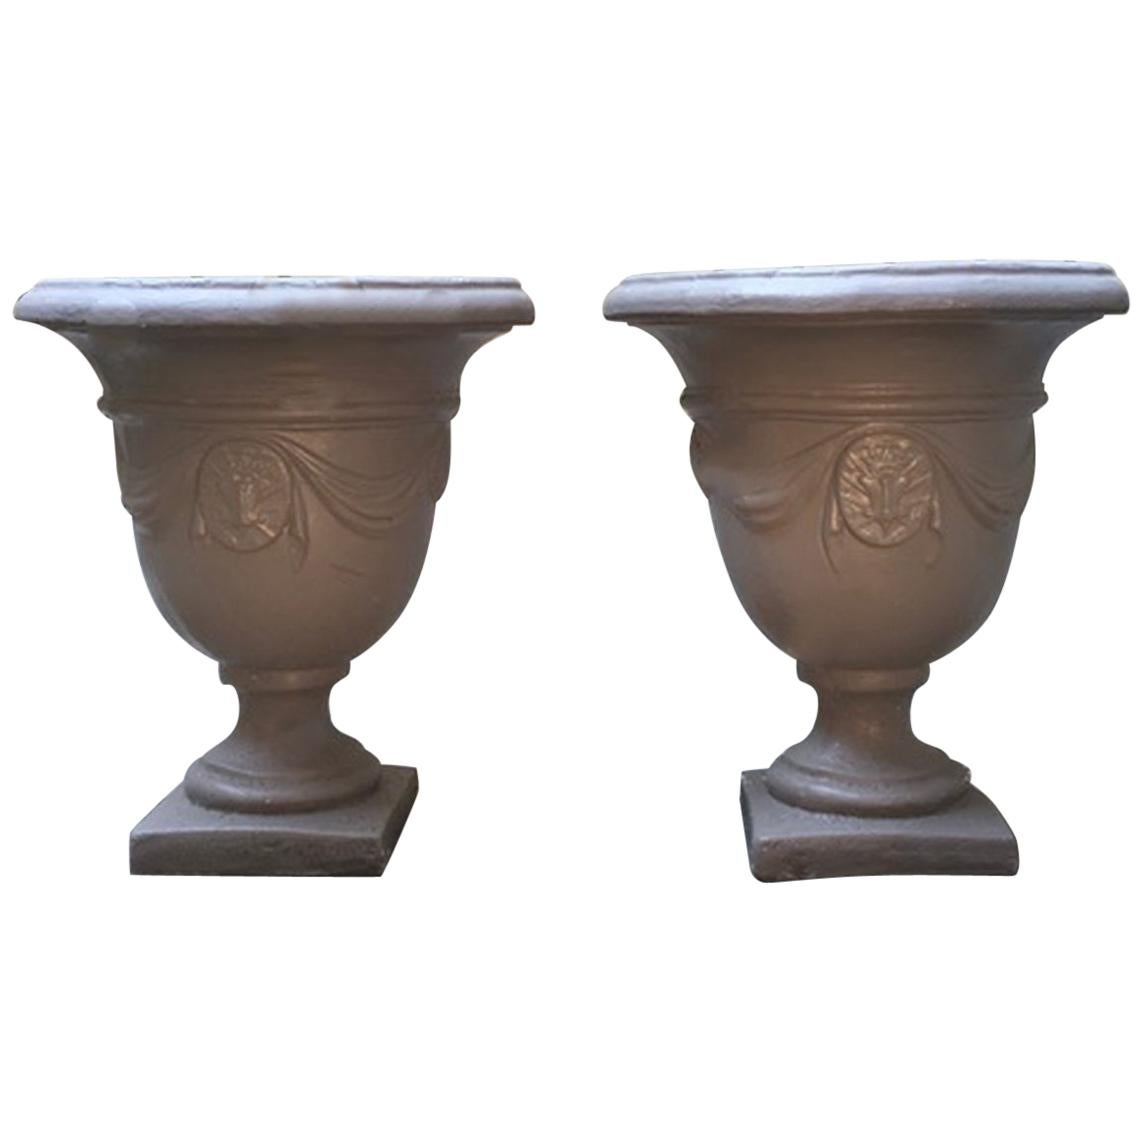 Pair of Italian Neoclassical Style Stone Paste Gardens Urns Hand Paint Mud Color